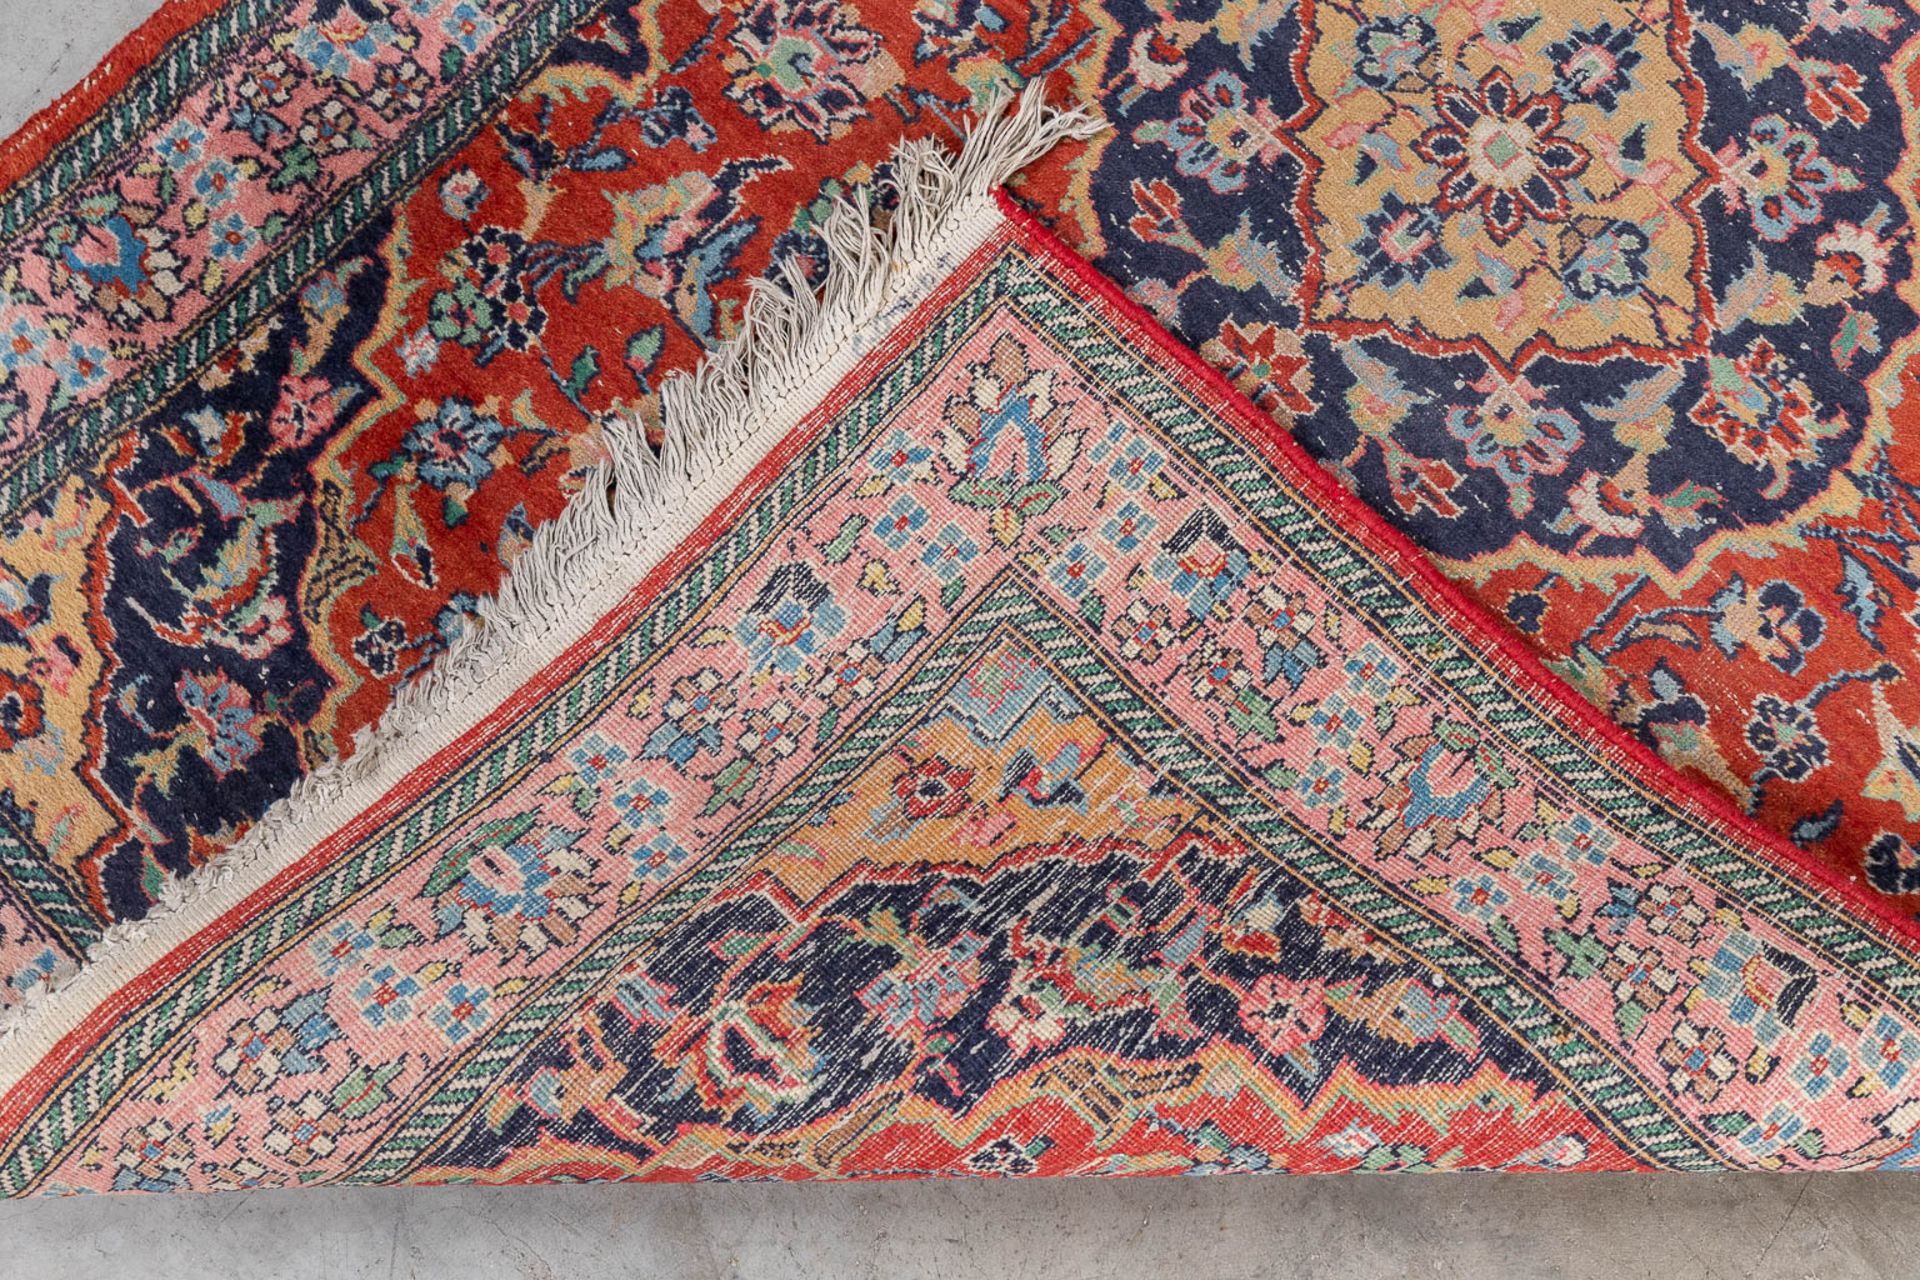 A collection of 3 Oriental hand-made carpets. Kashan and a prayer rug. (L: 180 x W: 119 cm) - Image 12 of 12